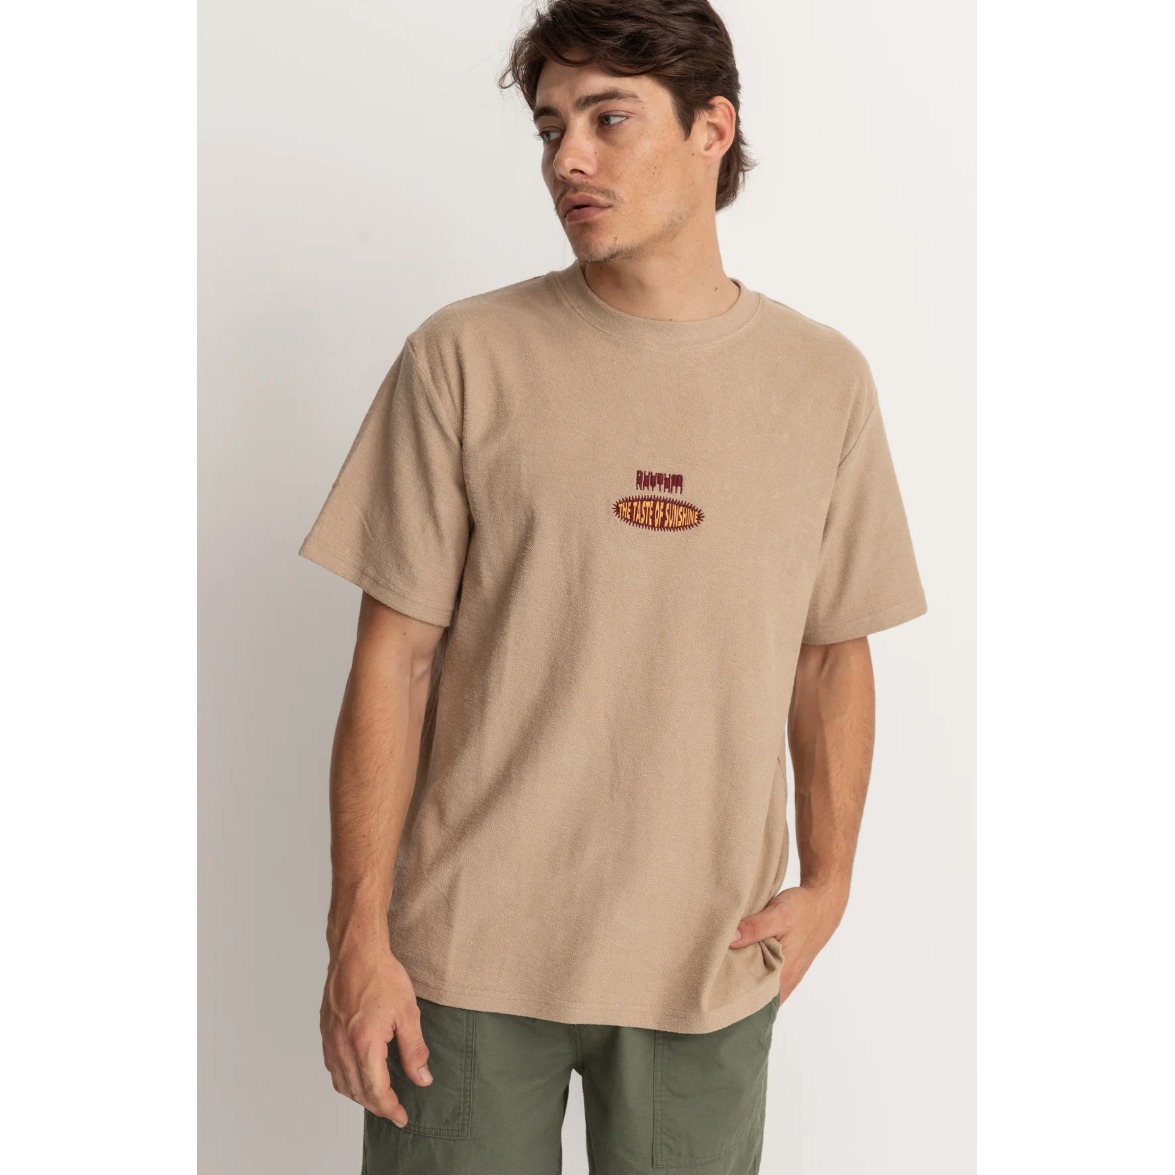 Stussy - Embroidered Vintage Terry SS Tee - Velocity 21